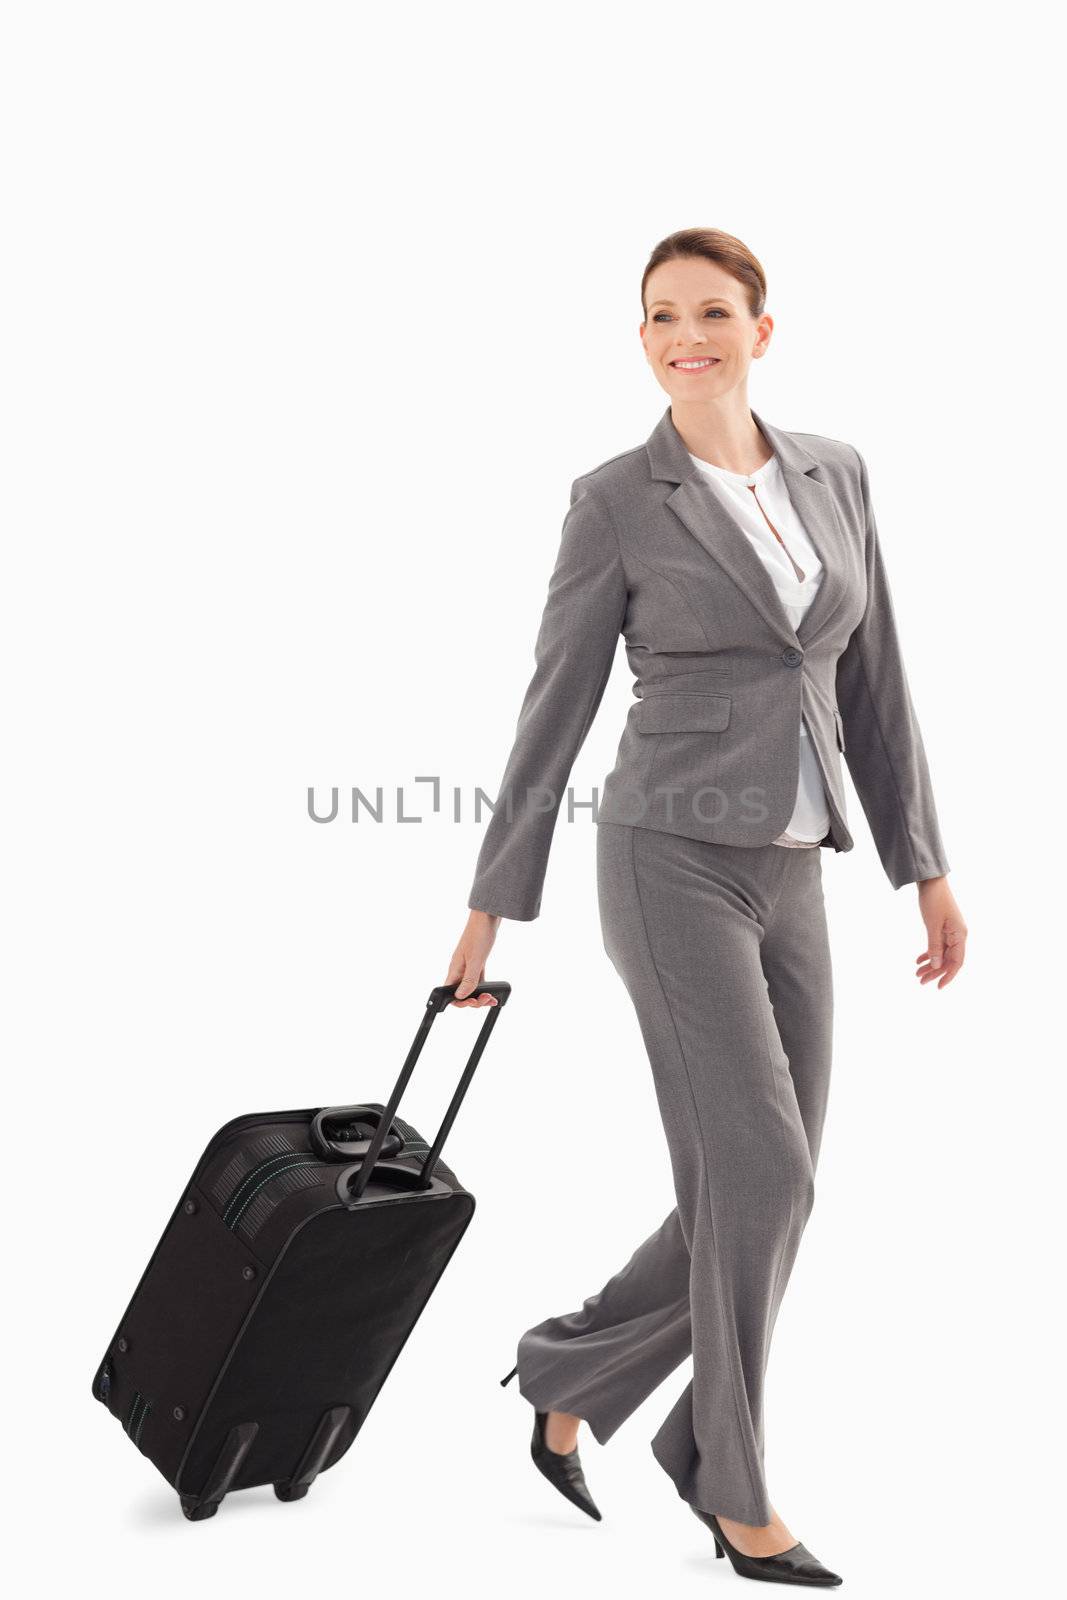 A businesswoman is smiling and walking with a suitcase